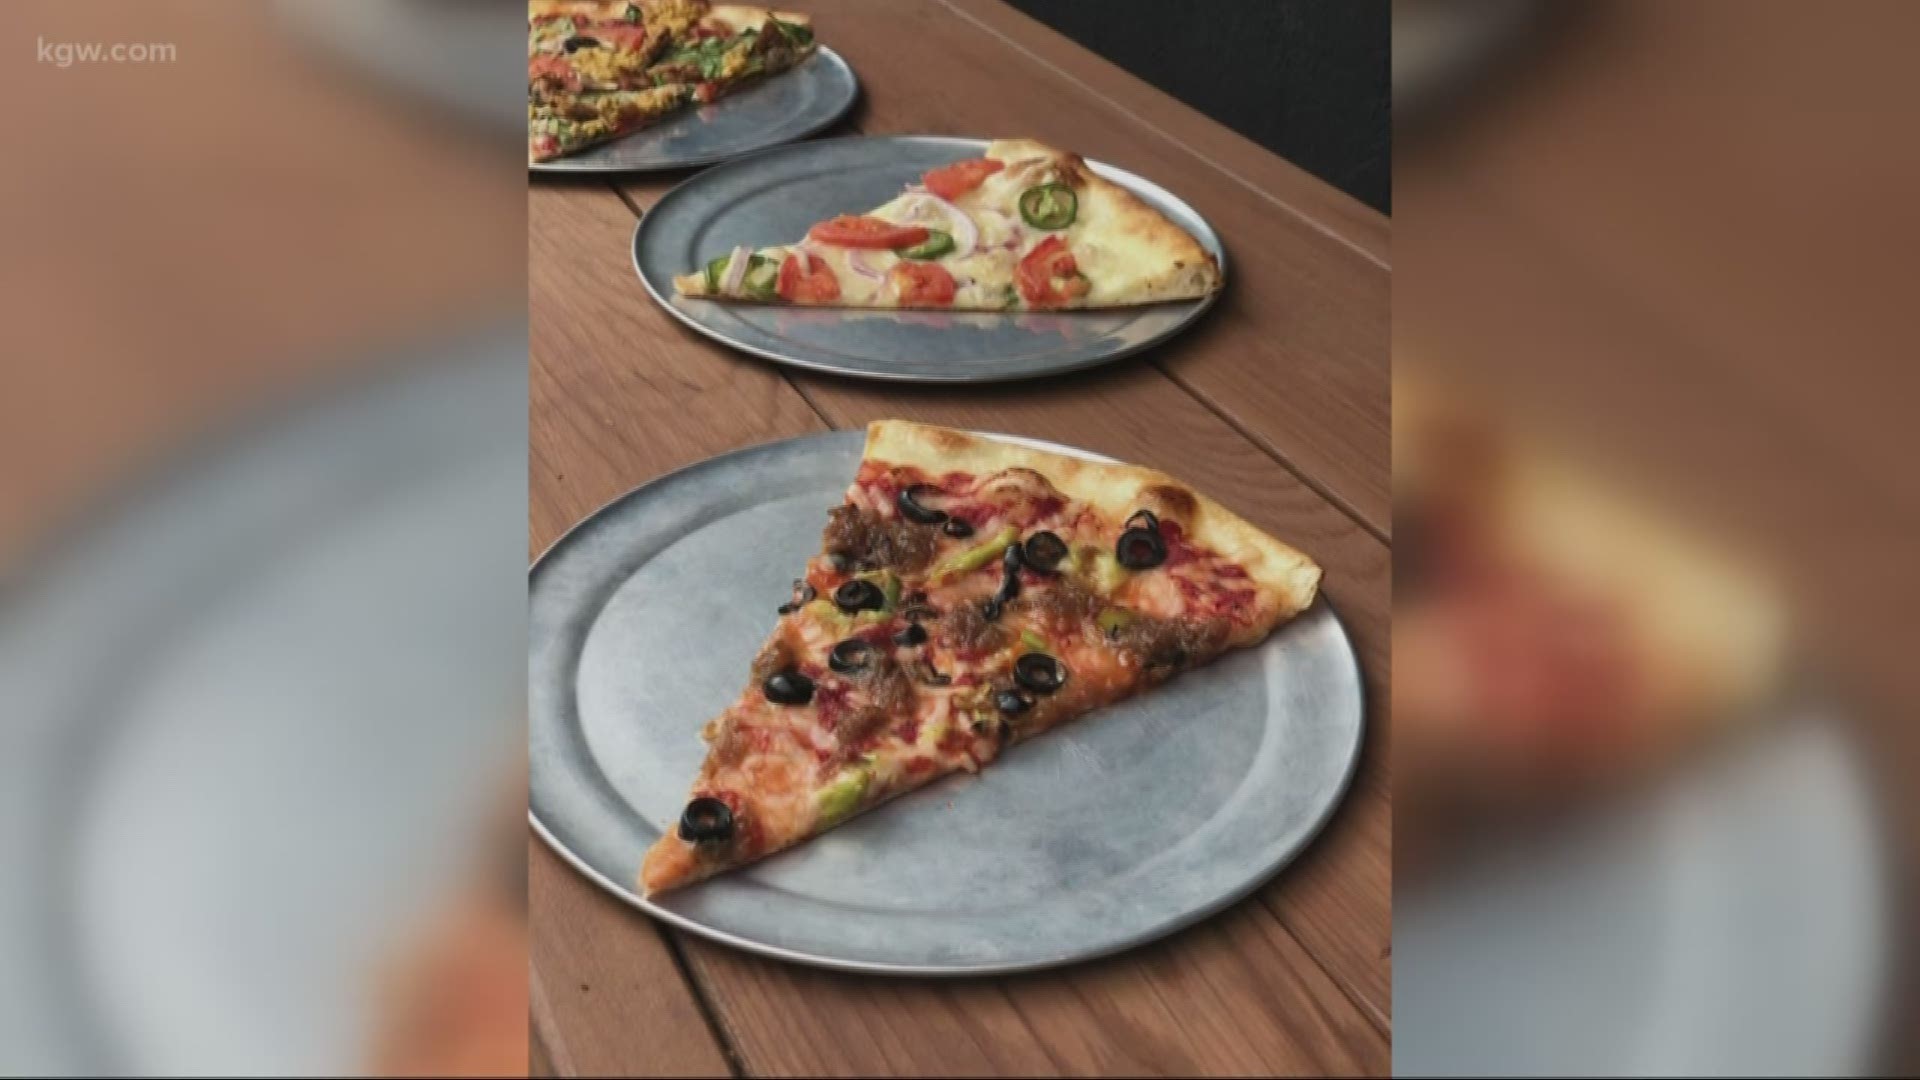 January is "Veganuary." Sizzle Pie and other Portland restaurants are serving up vegan specials all month long.
sizzlepie.com
#TonightwithCassidy